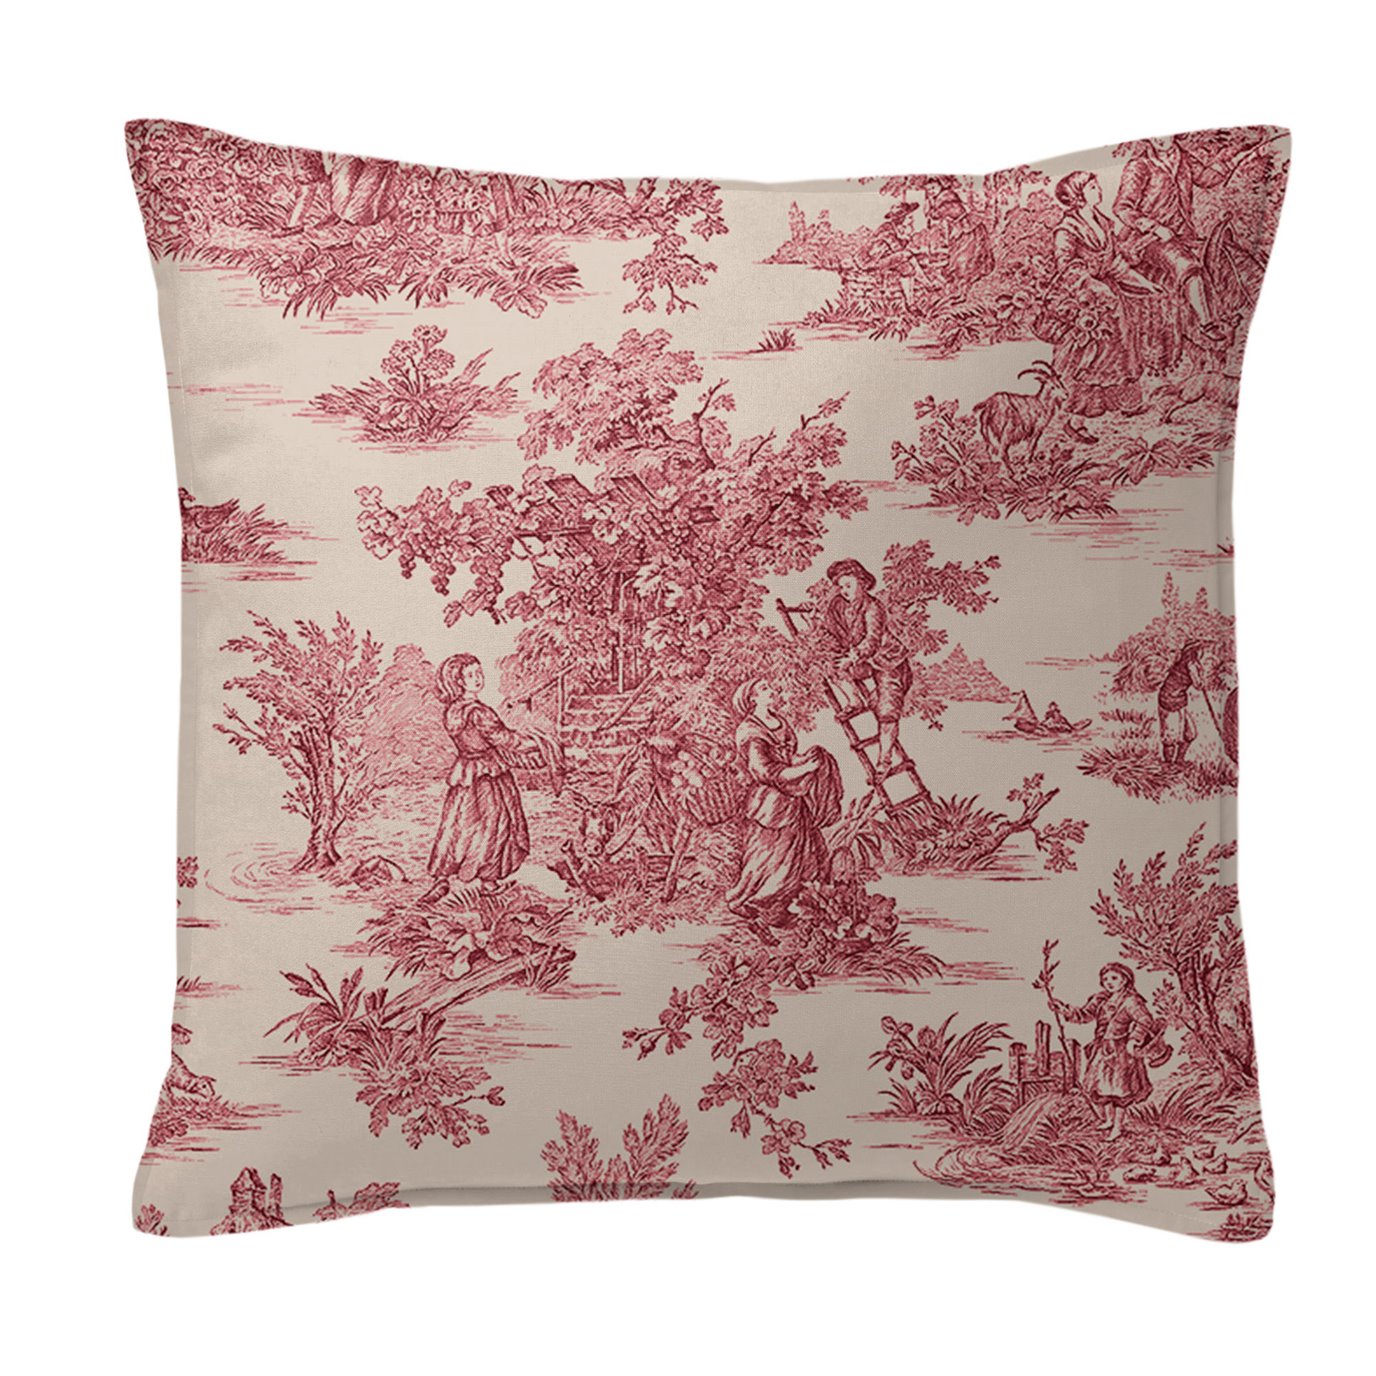 Bouclair Red Decorative Pillow - Size 20" Square